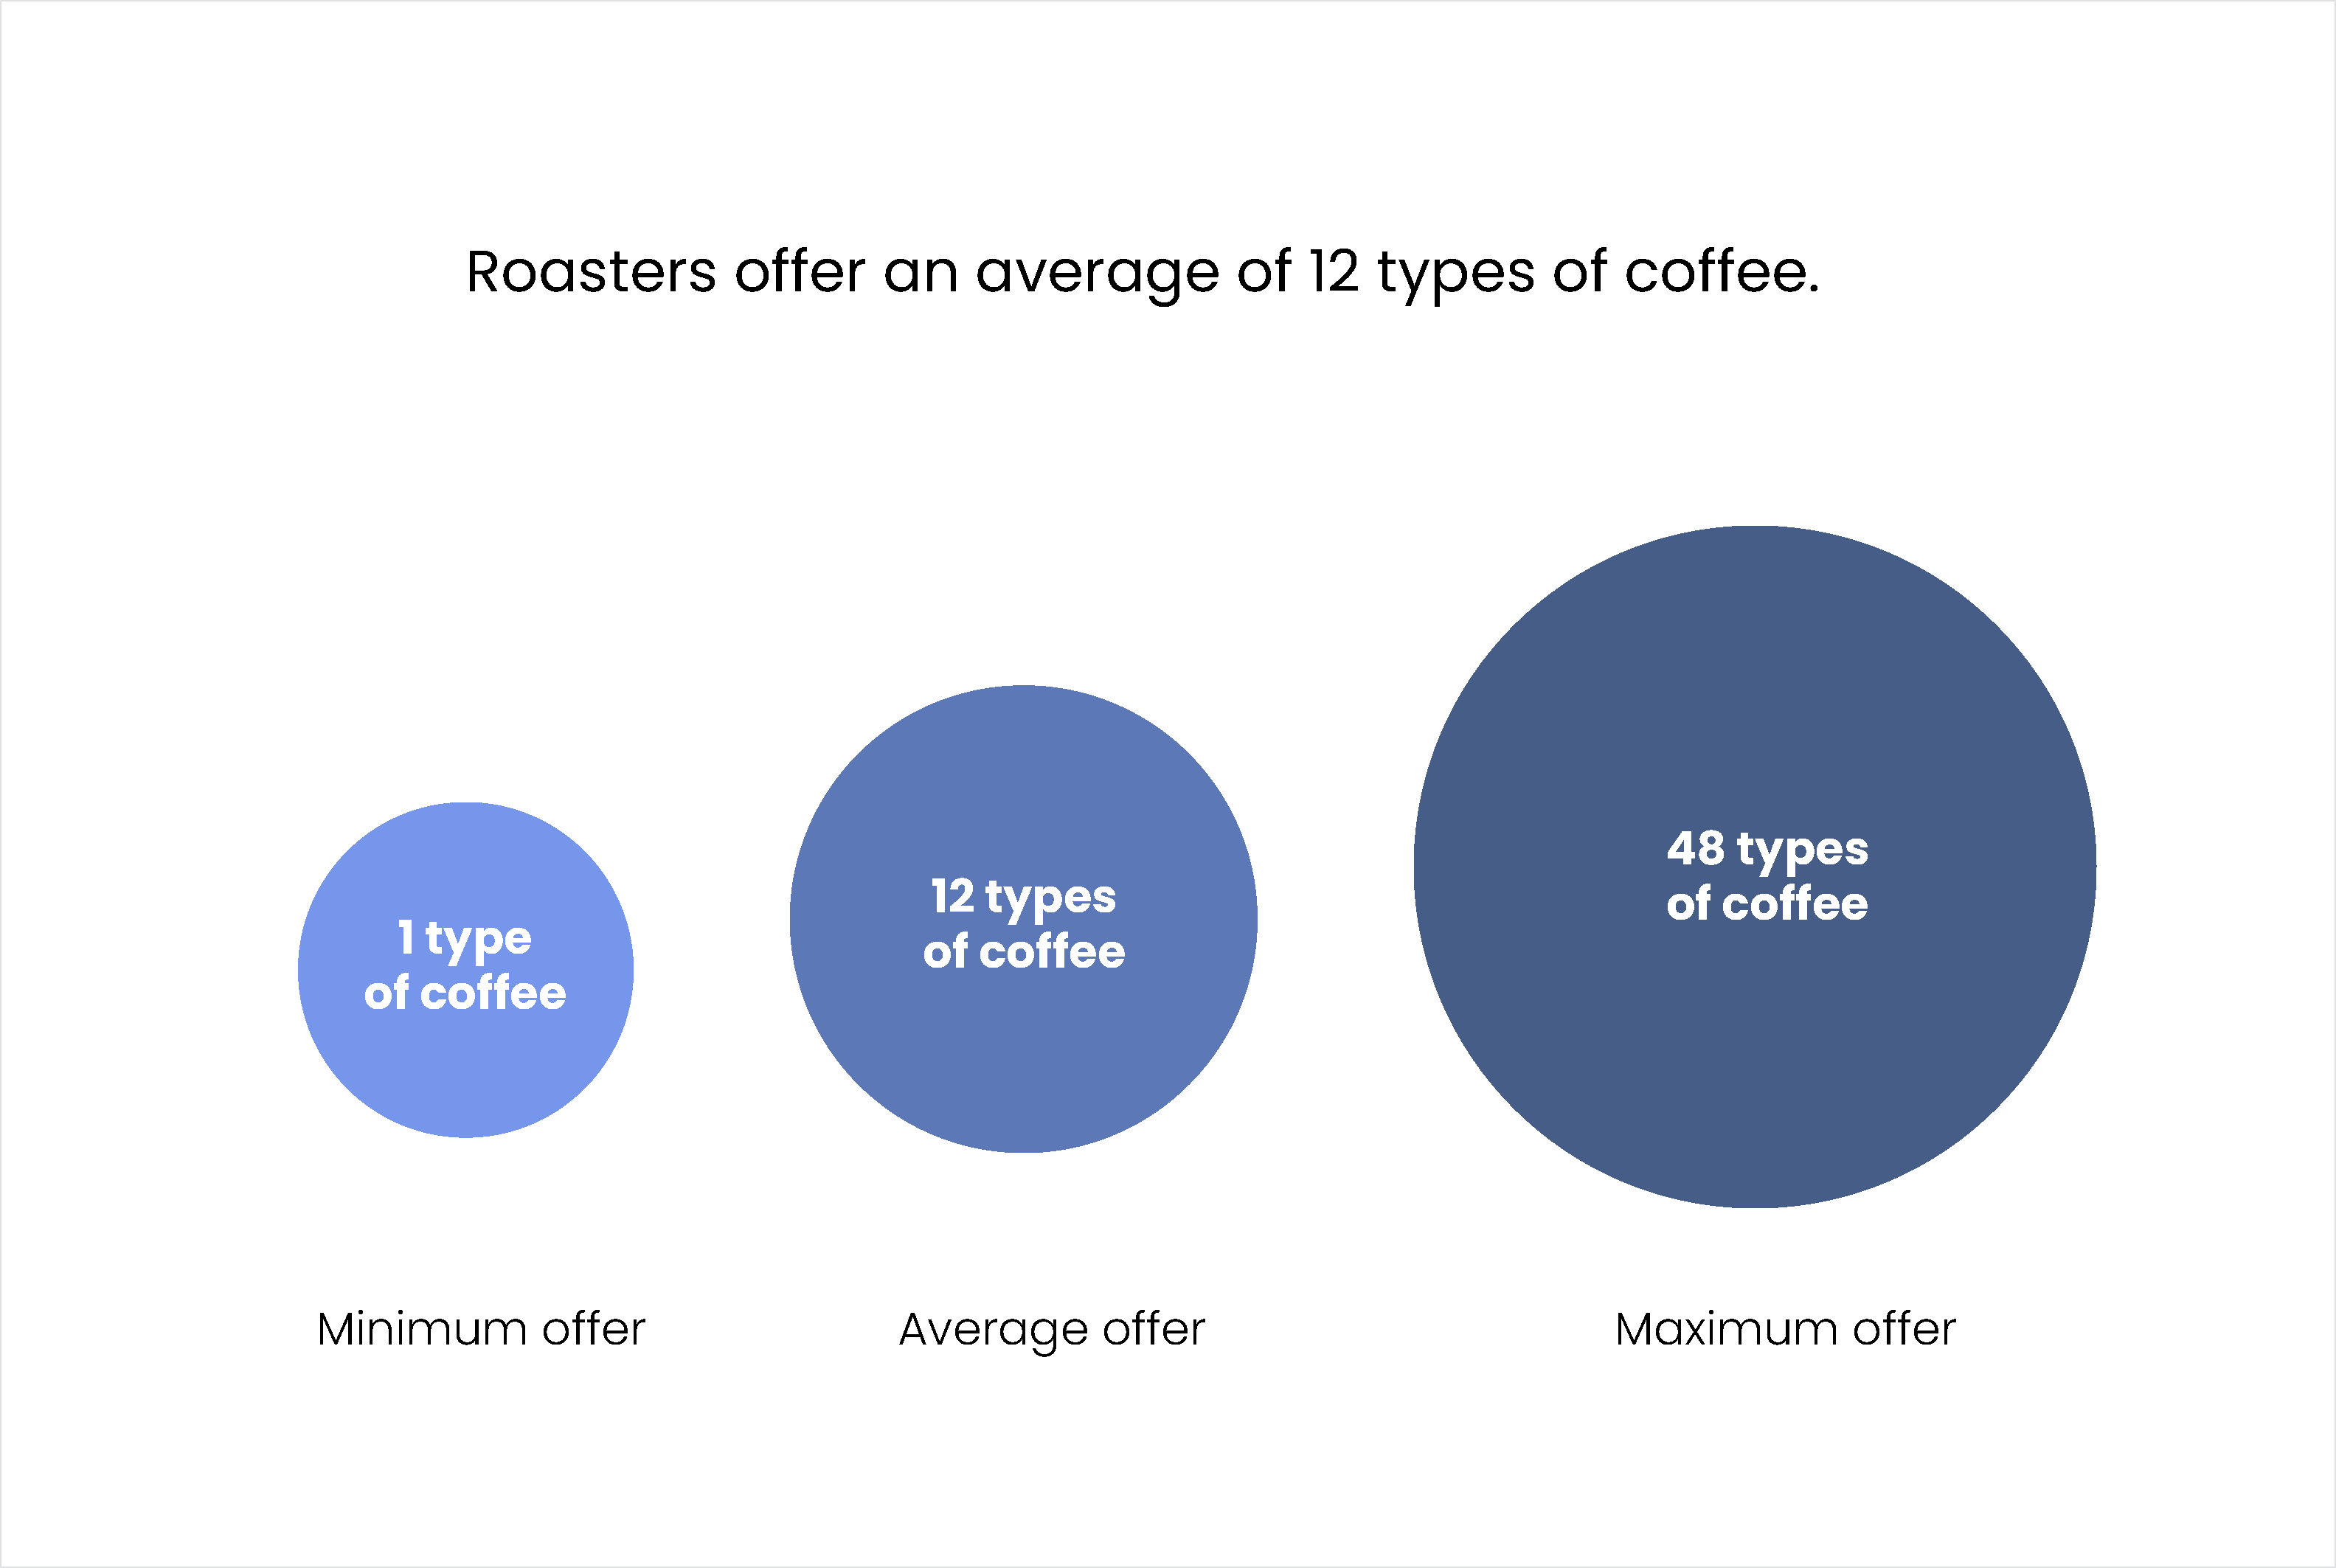 Roasters offer an average of 12 types of coffee